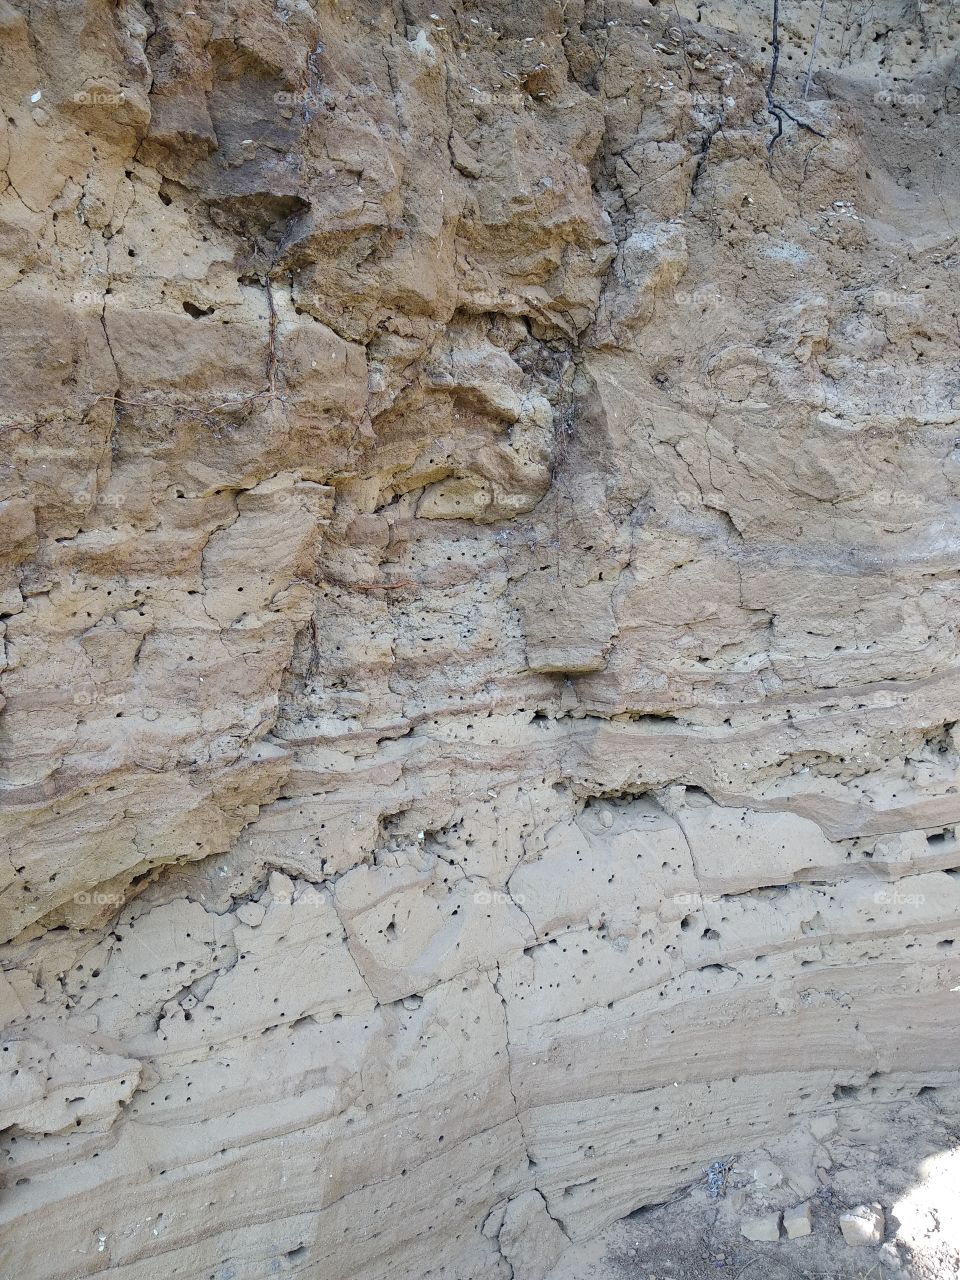 cliff with insect nests